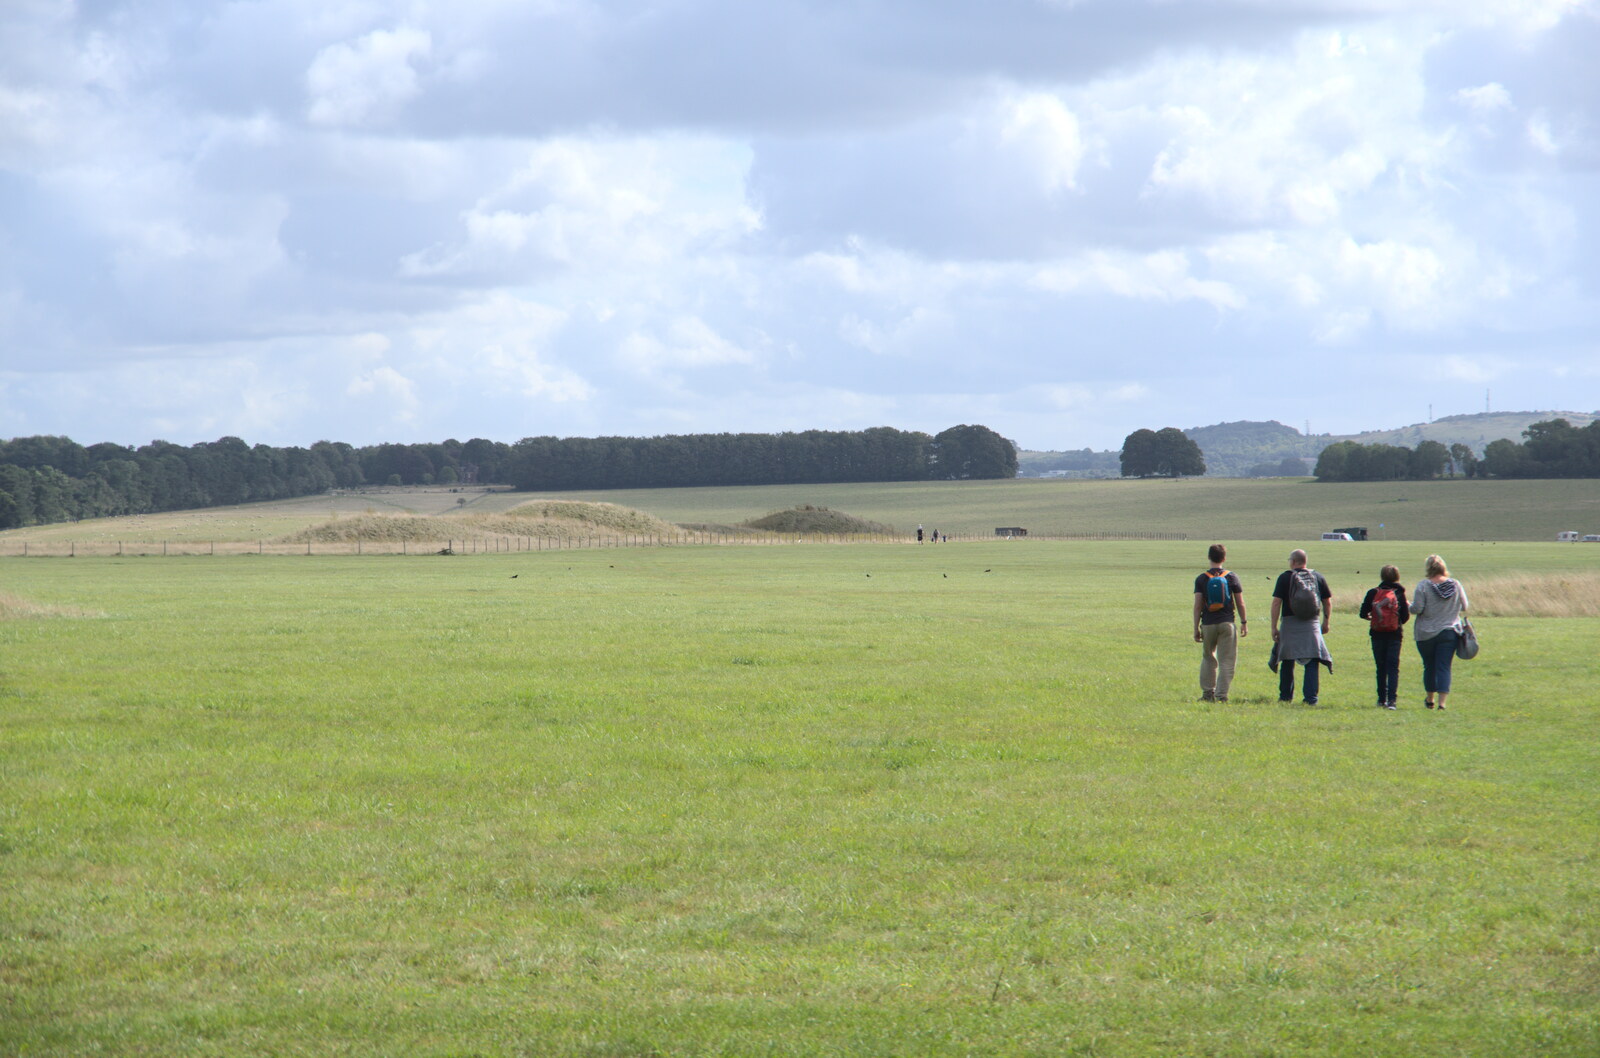 Some of the barrows on the Cursus from Stone Circles: Stonehenge and Avebury, Wiltshire - 22nd August 2020